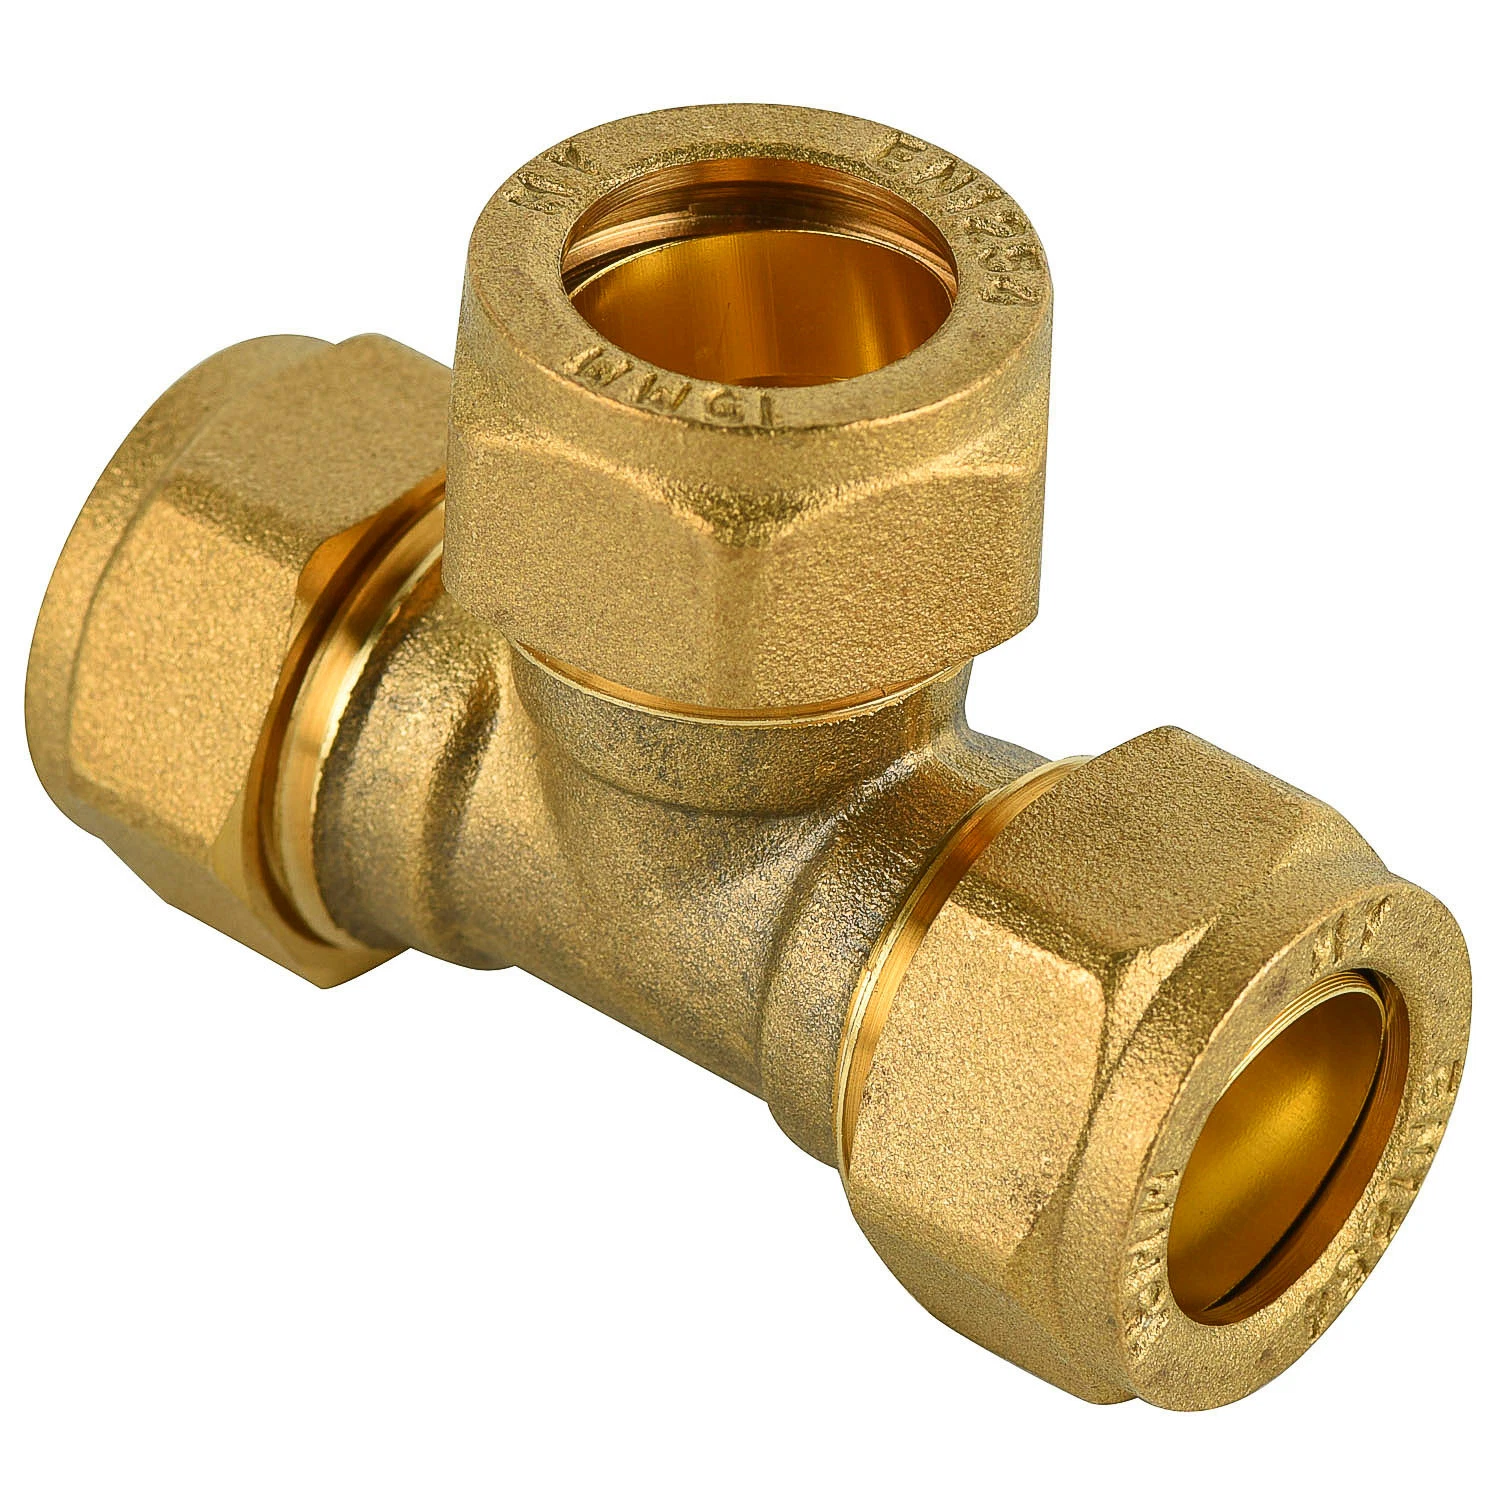 Coupling Materials Brass Pipe Connector Compression Copper Pipe